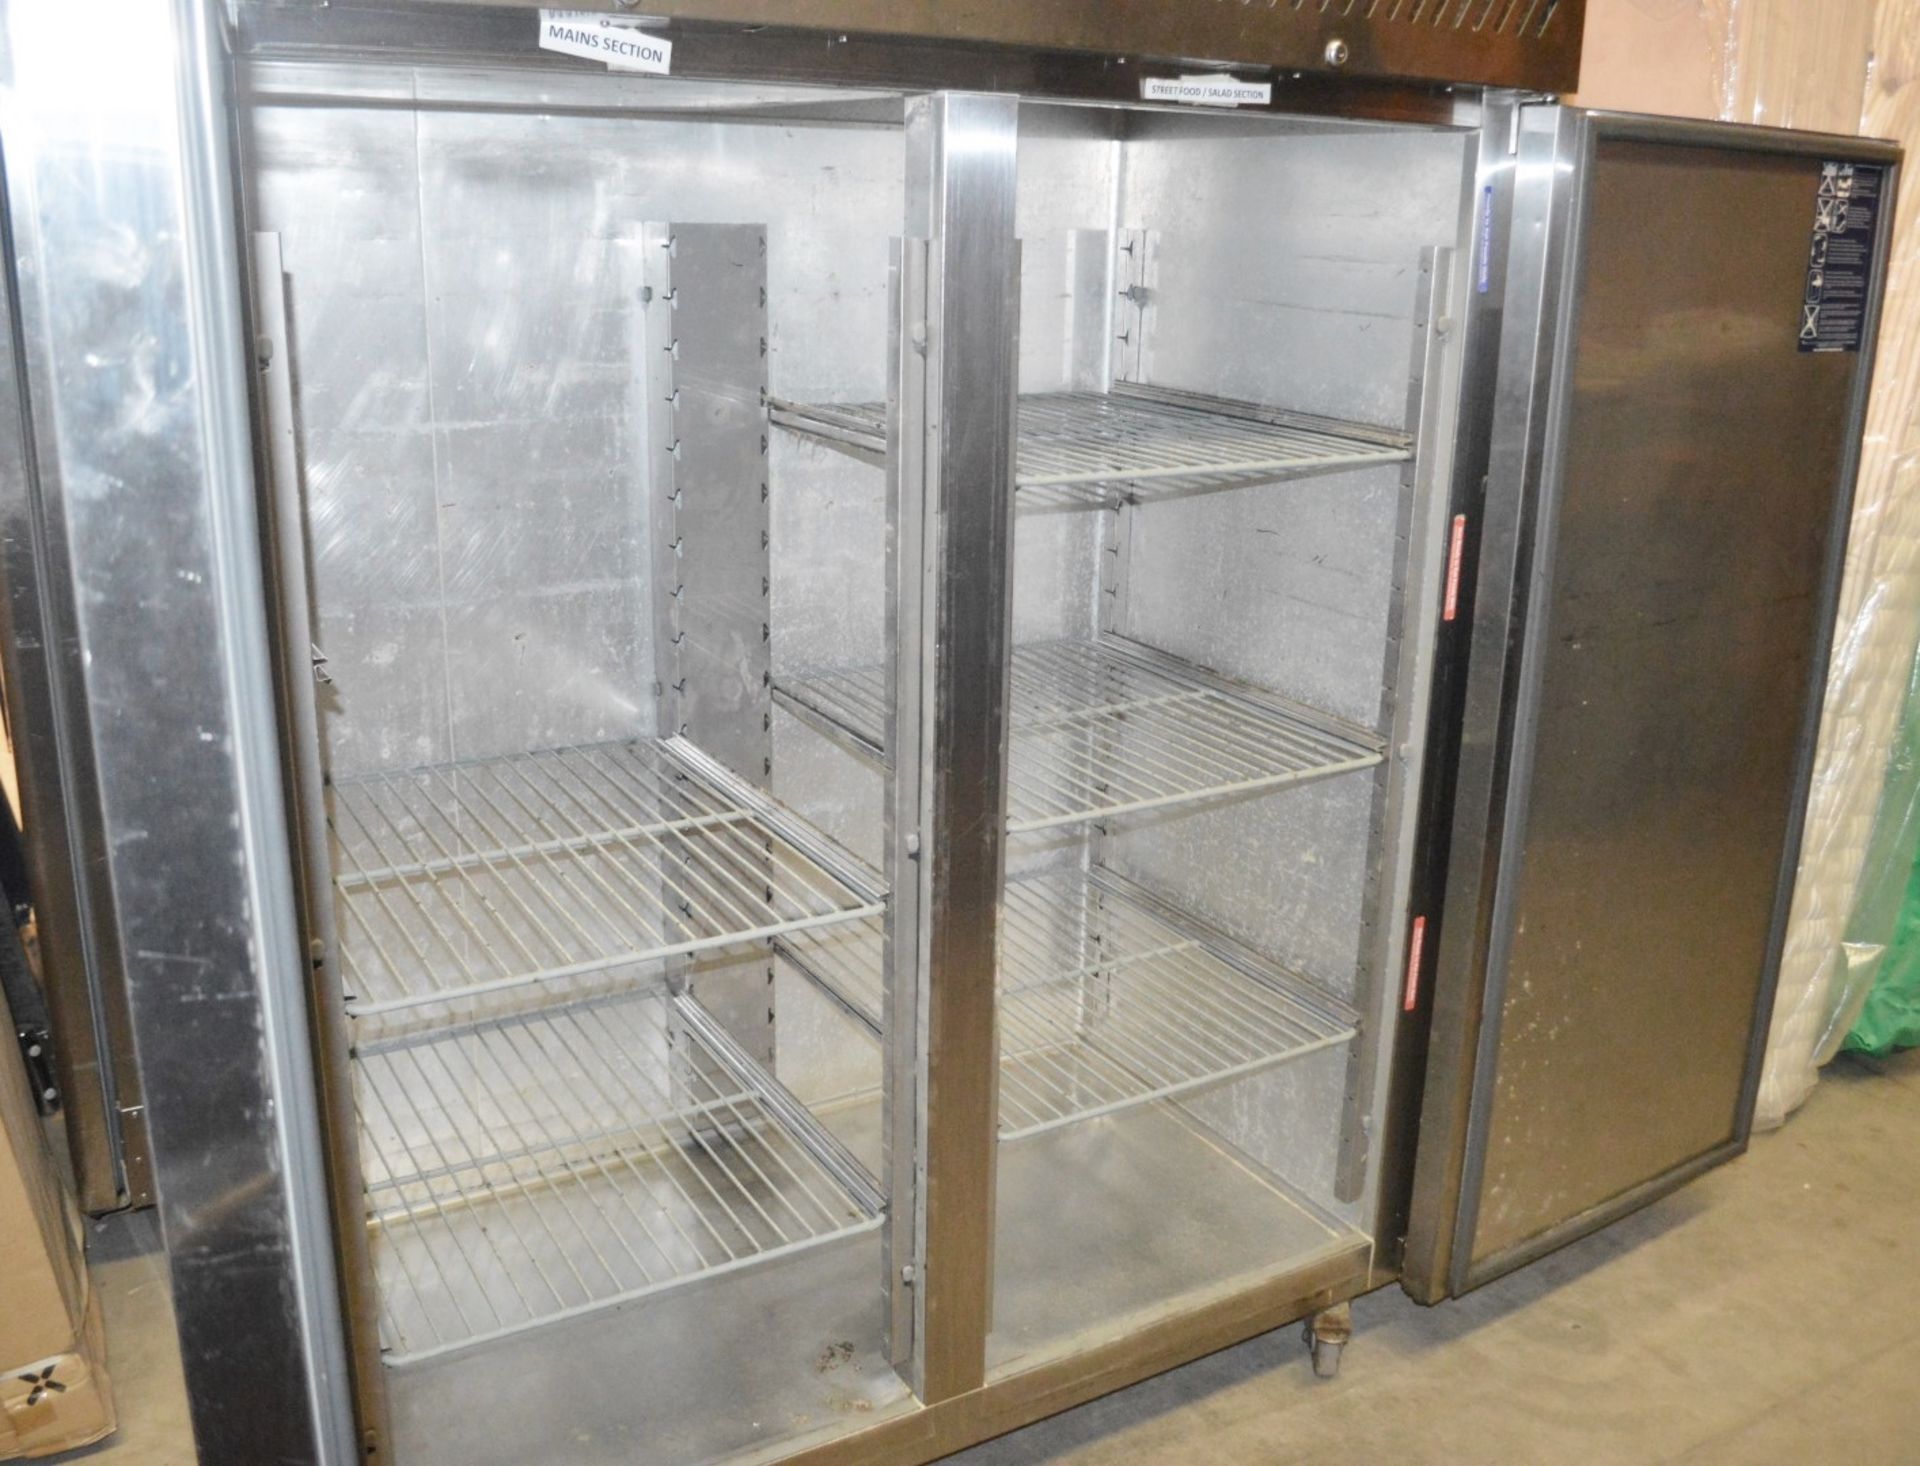 1 x WILLIAMS Upright 2-Door Stainless Steel Commercial Chiller Unit - Dimensions: H195 x W140 x - Image 6 of 12